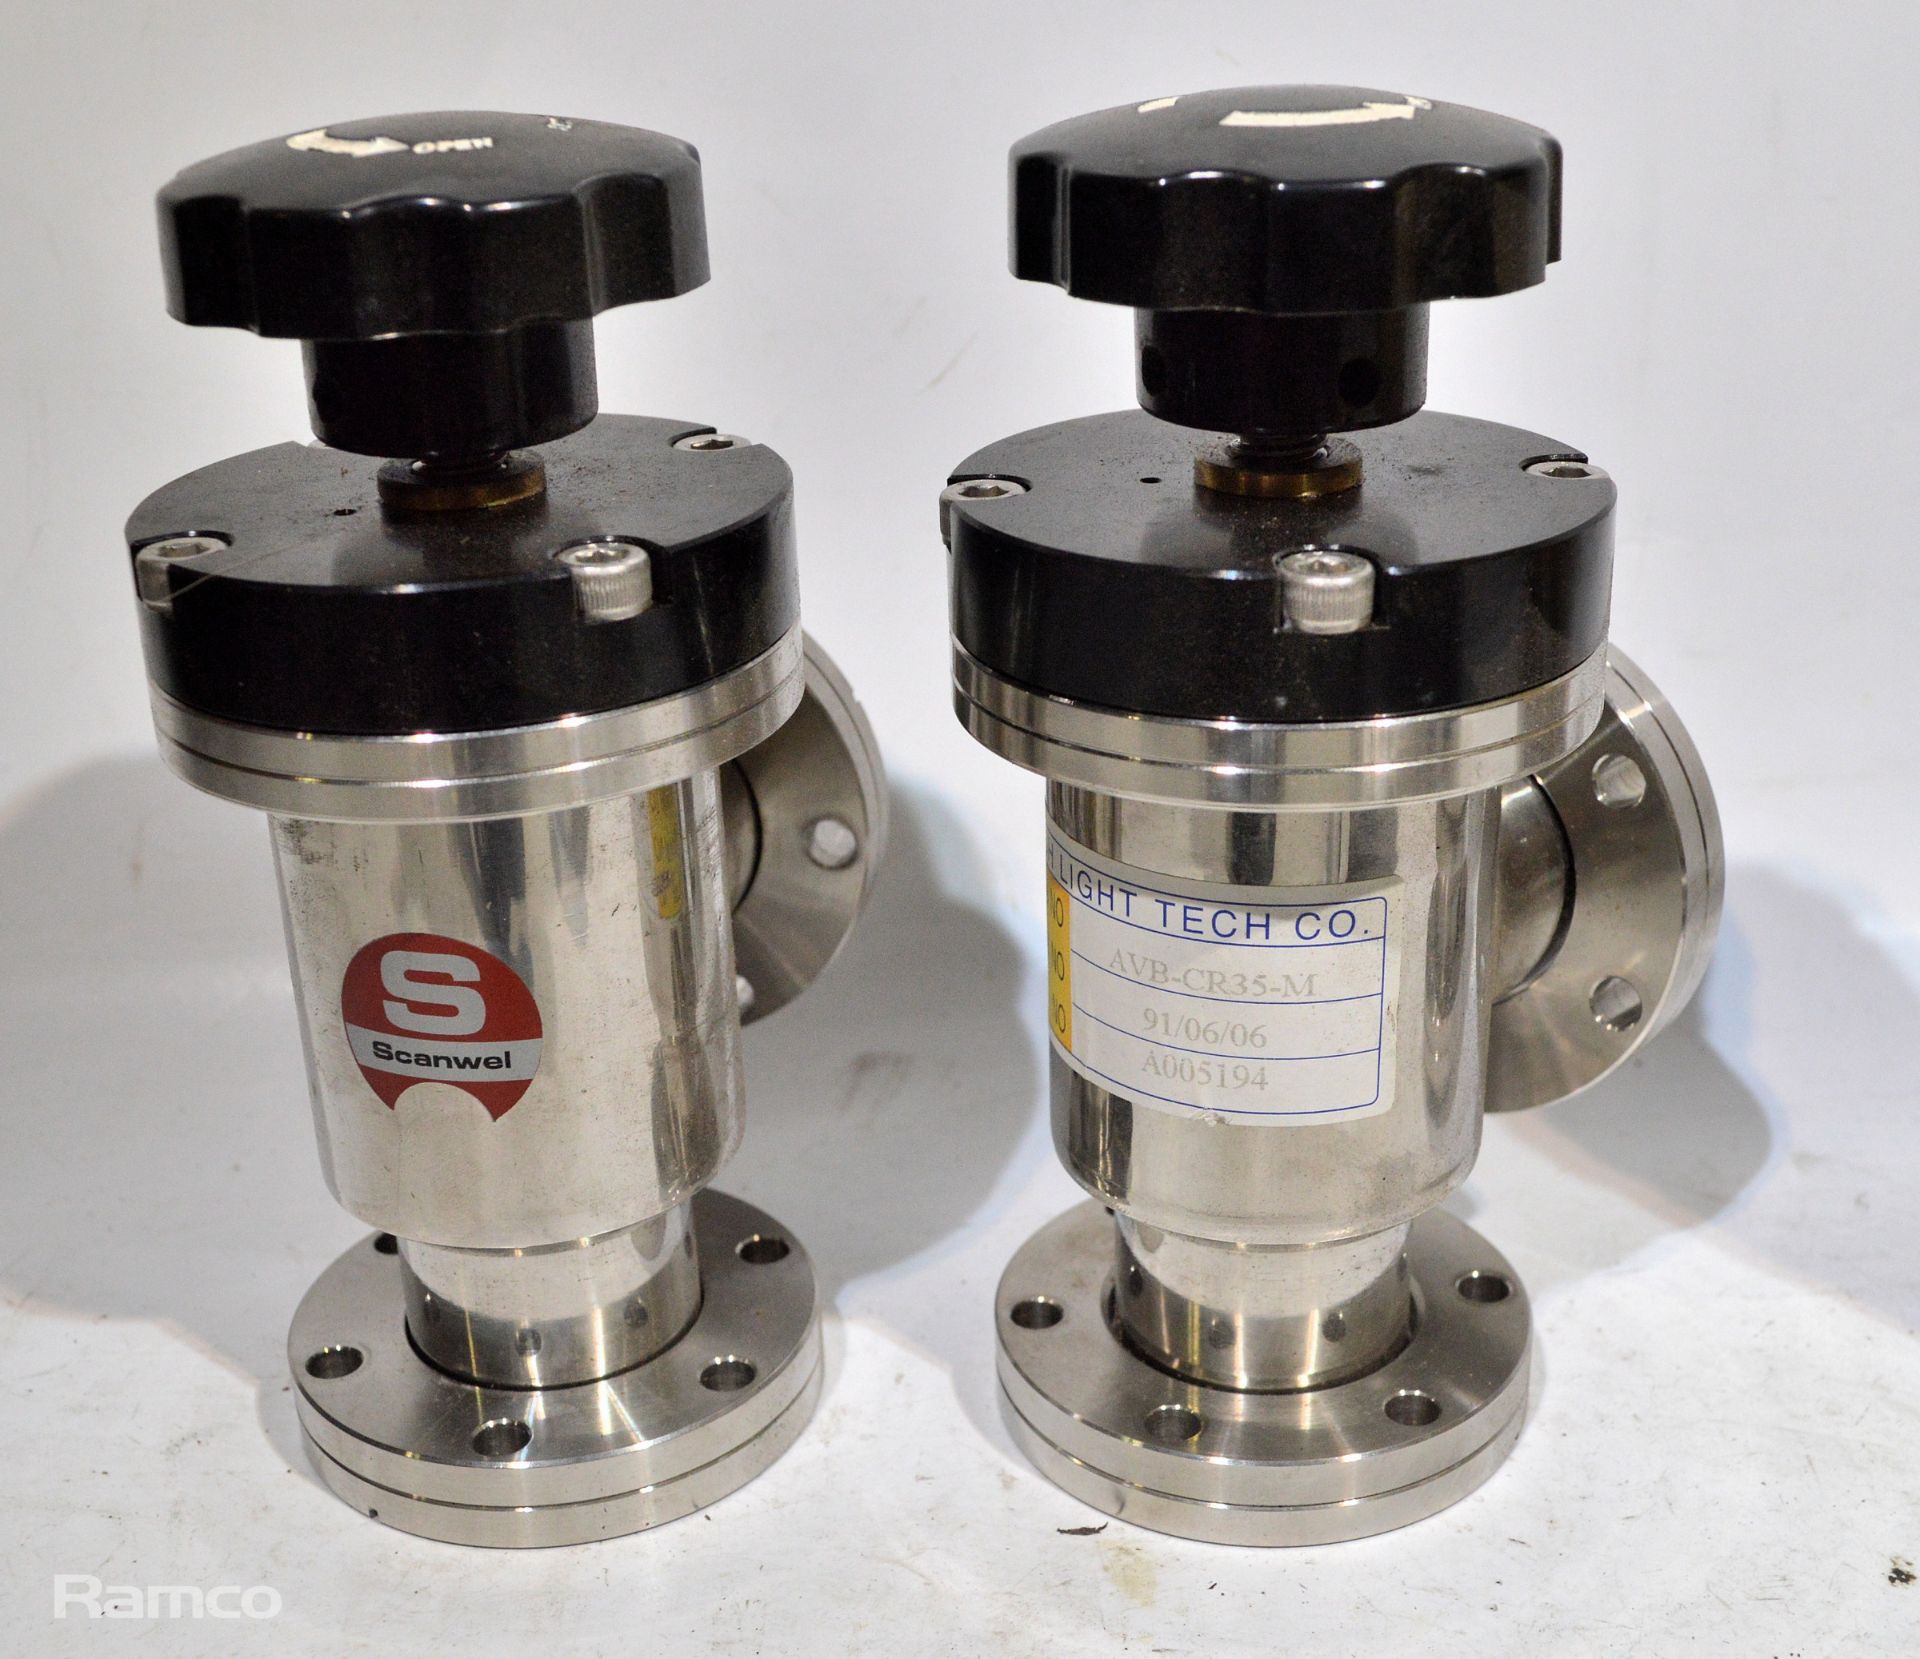 6x Scanwell Conflat Bellows Vacuum Valves - Image 2 of 6